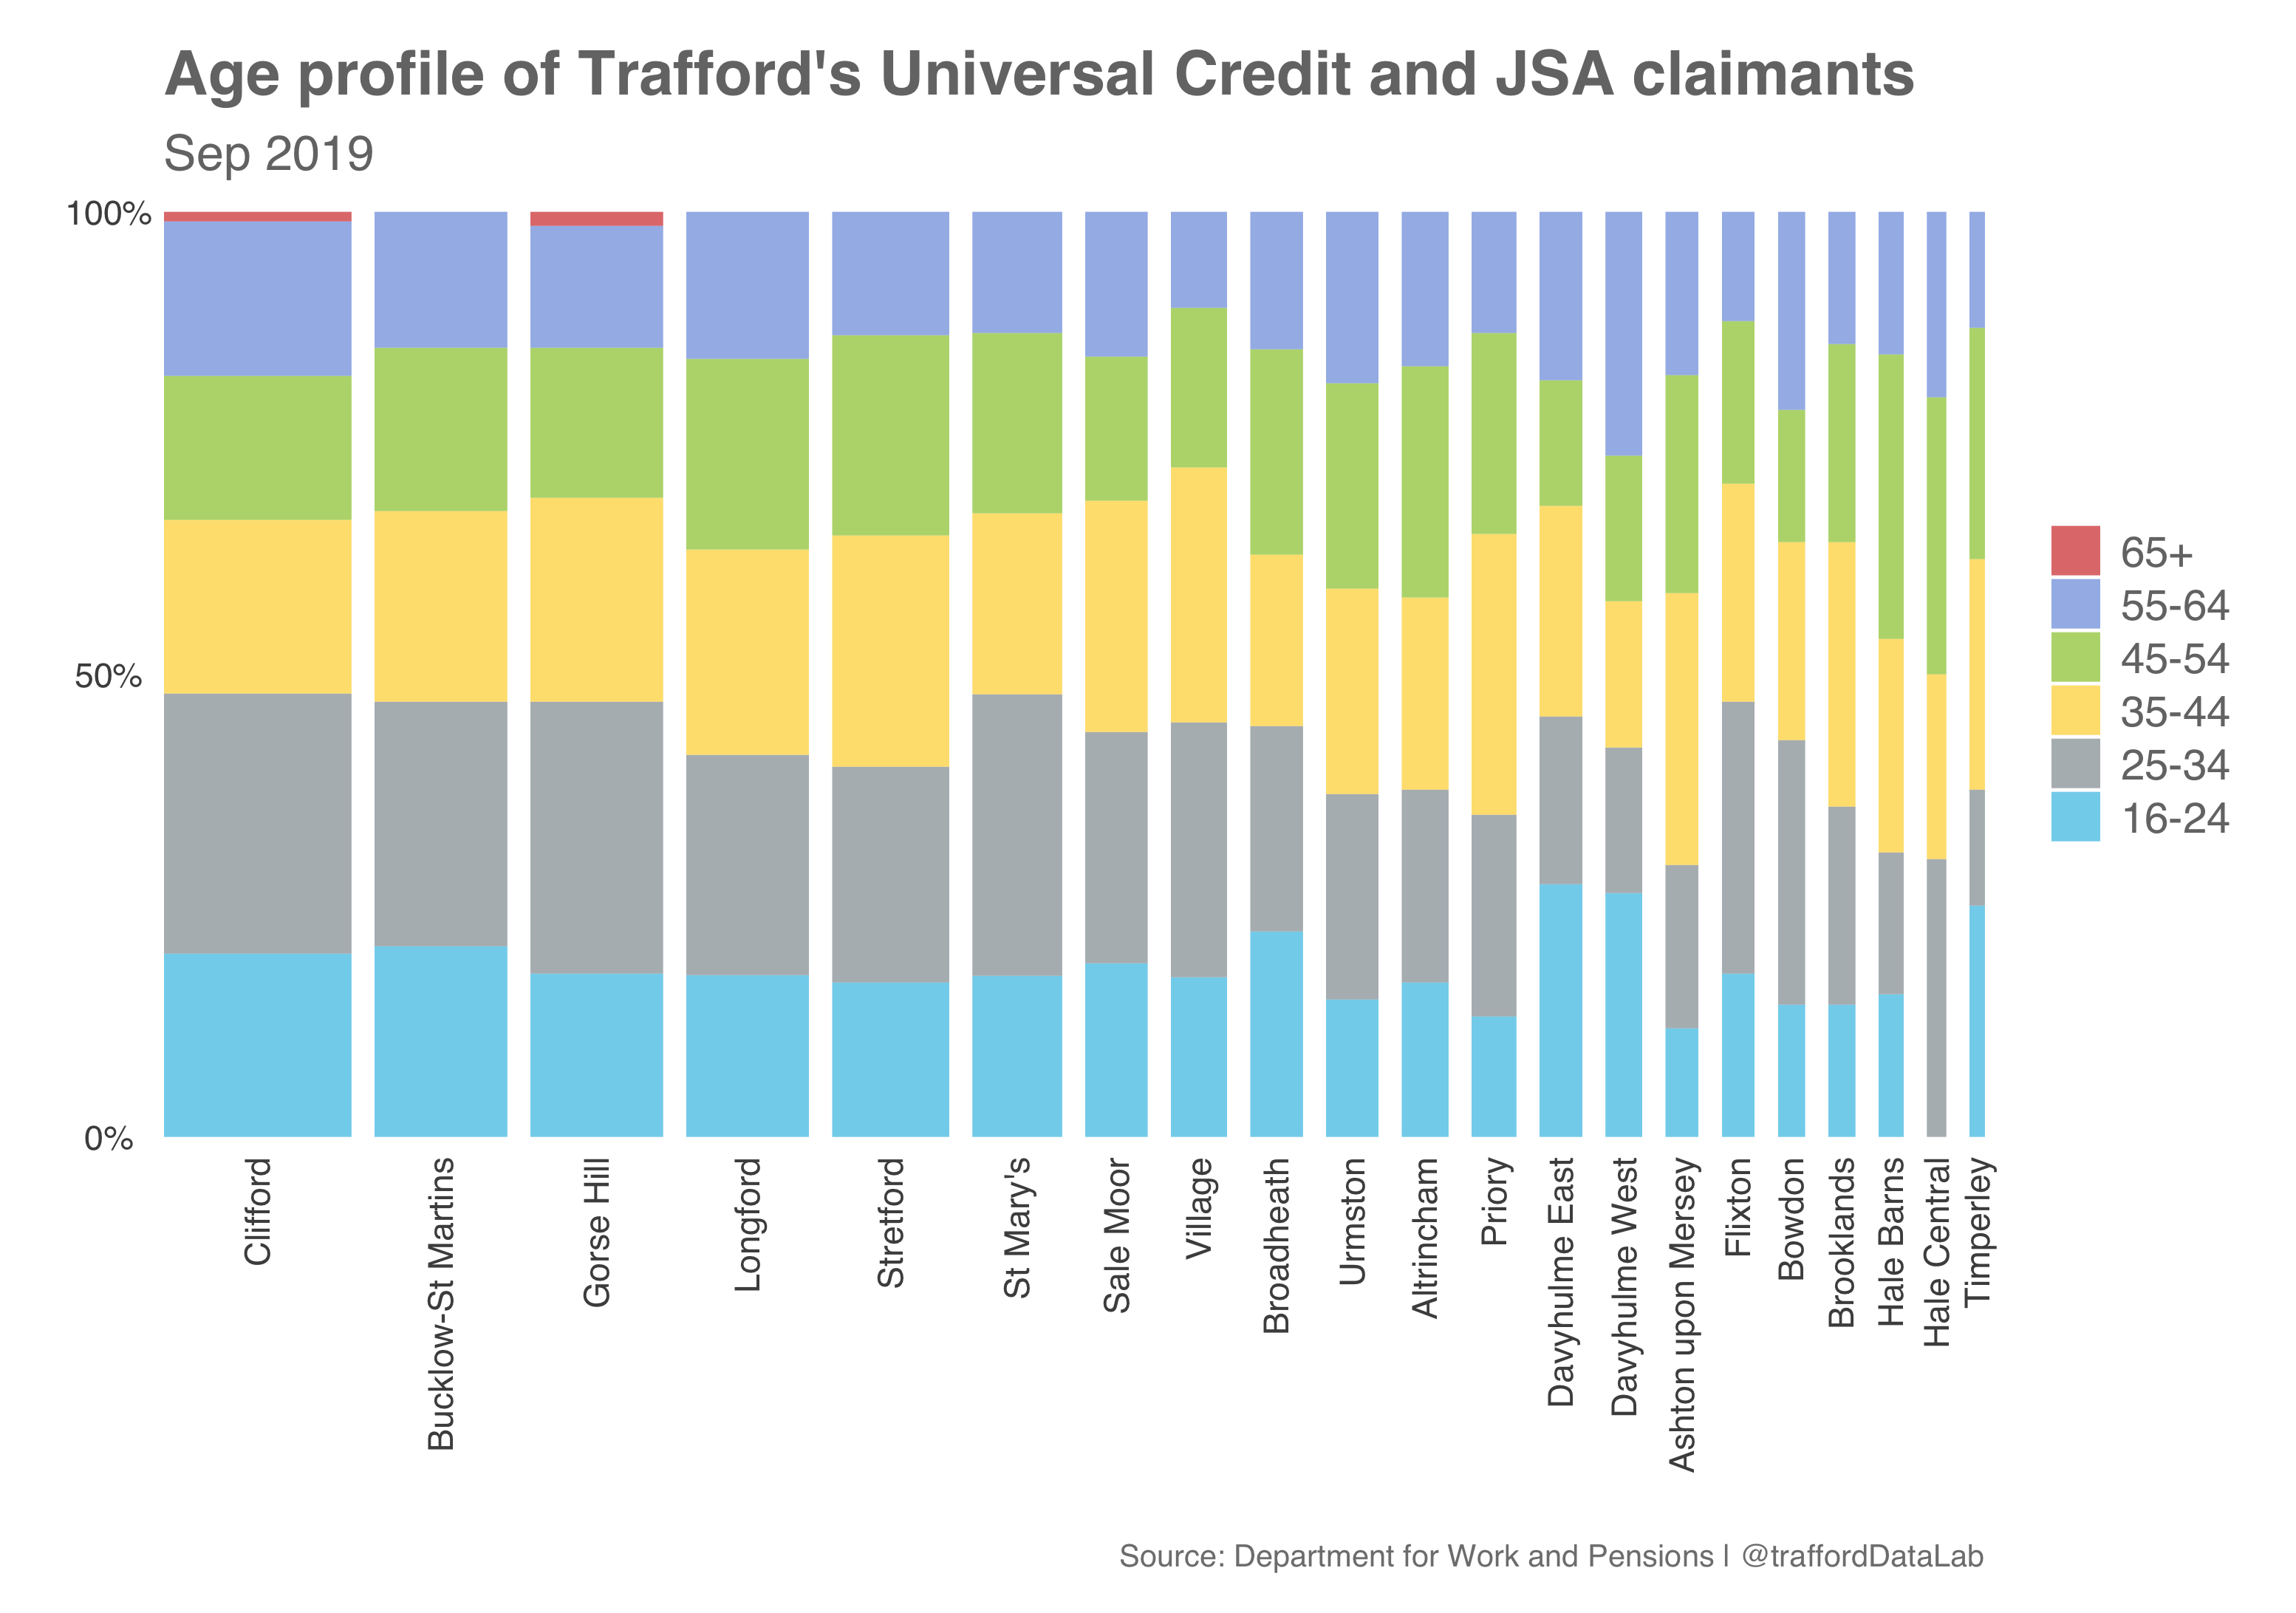 Age profile of Trafford's Universal Credit claimants by electoral ward, 2019.